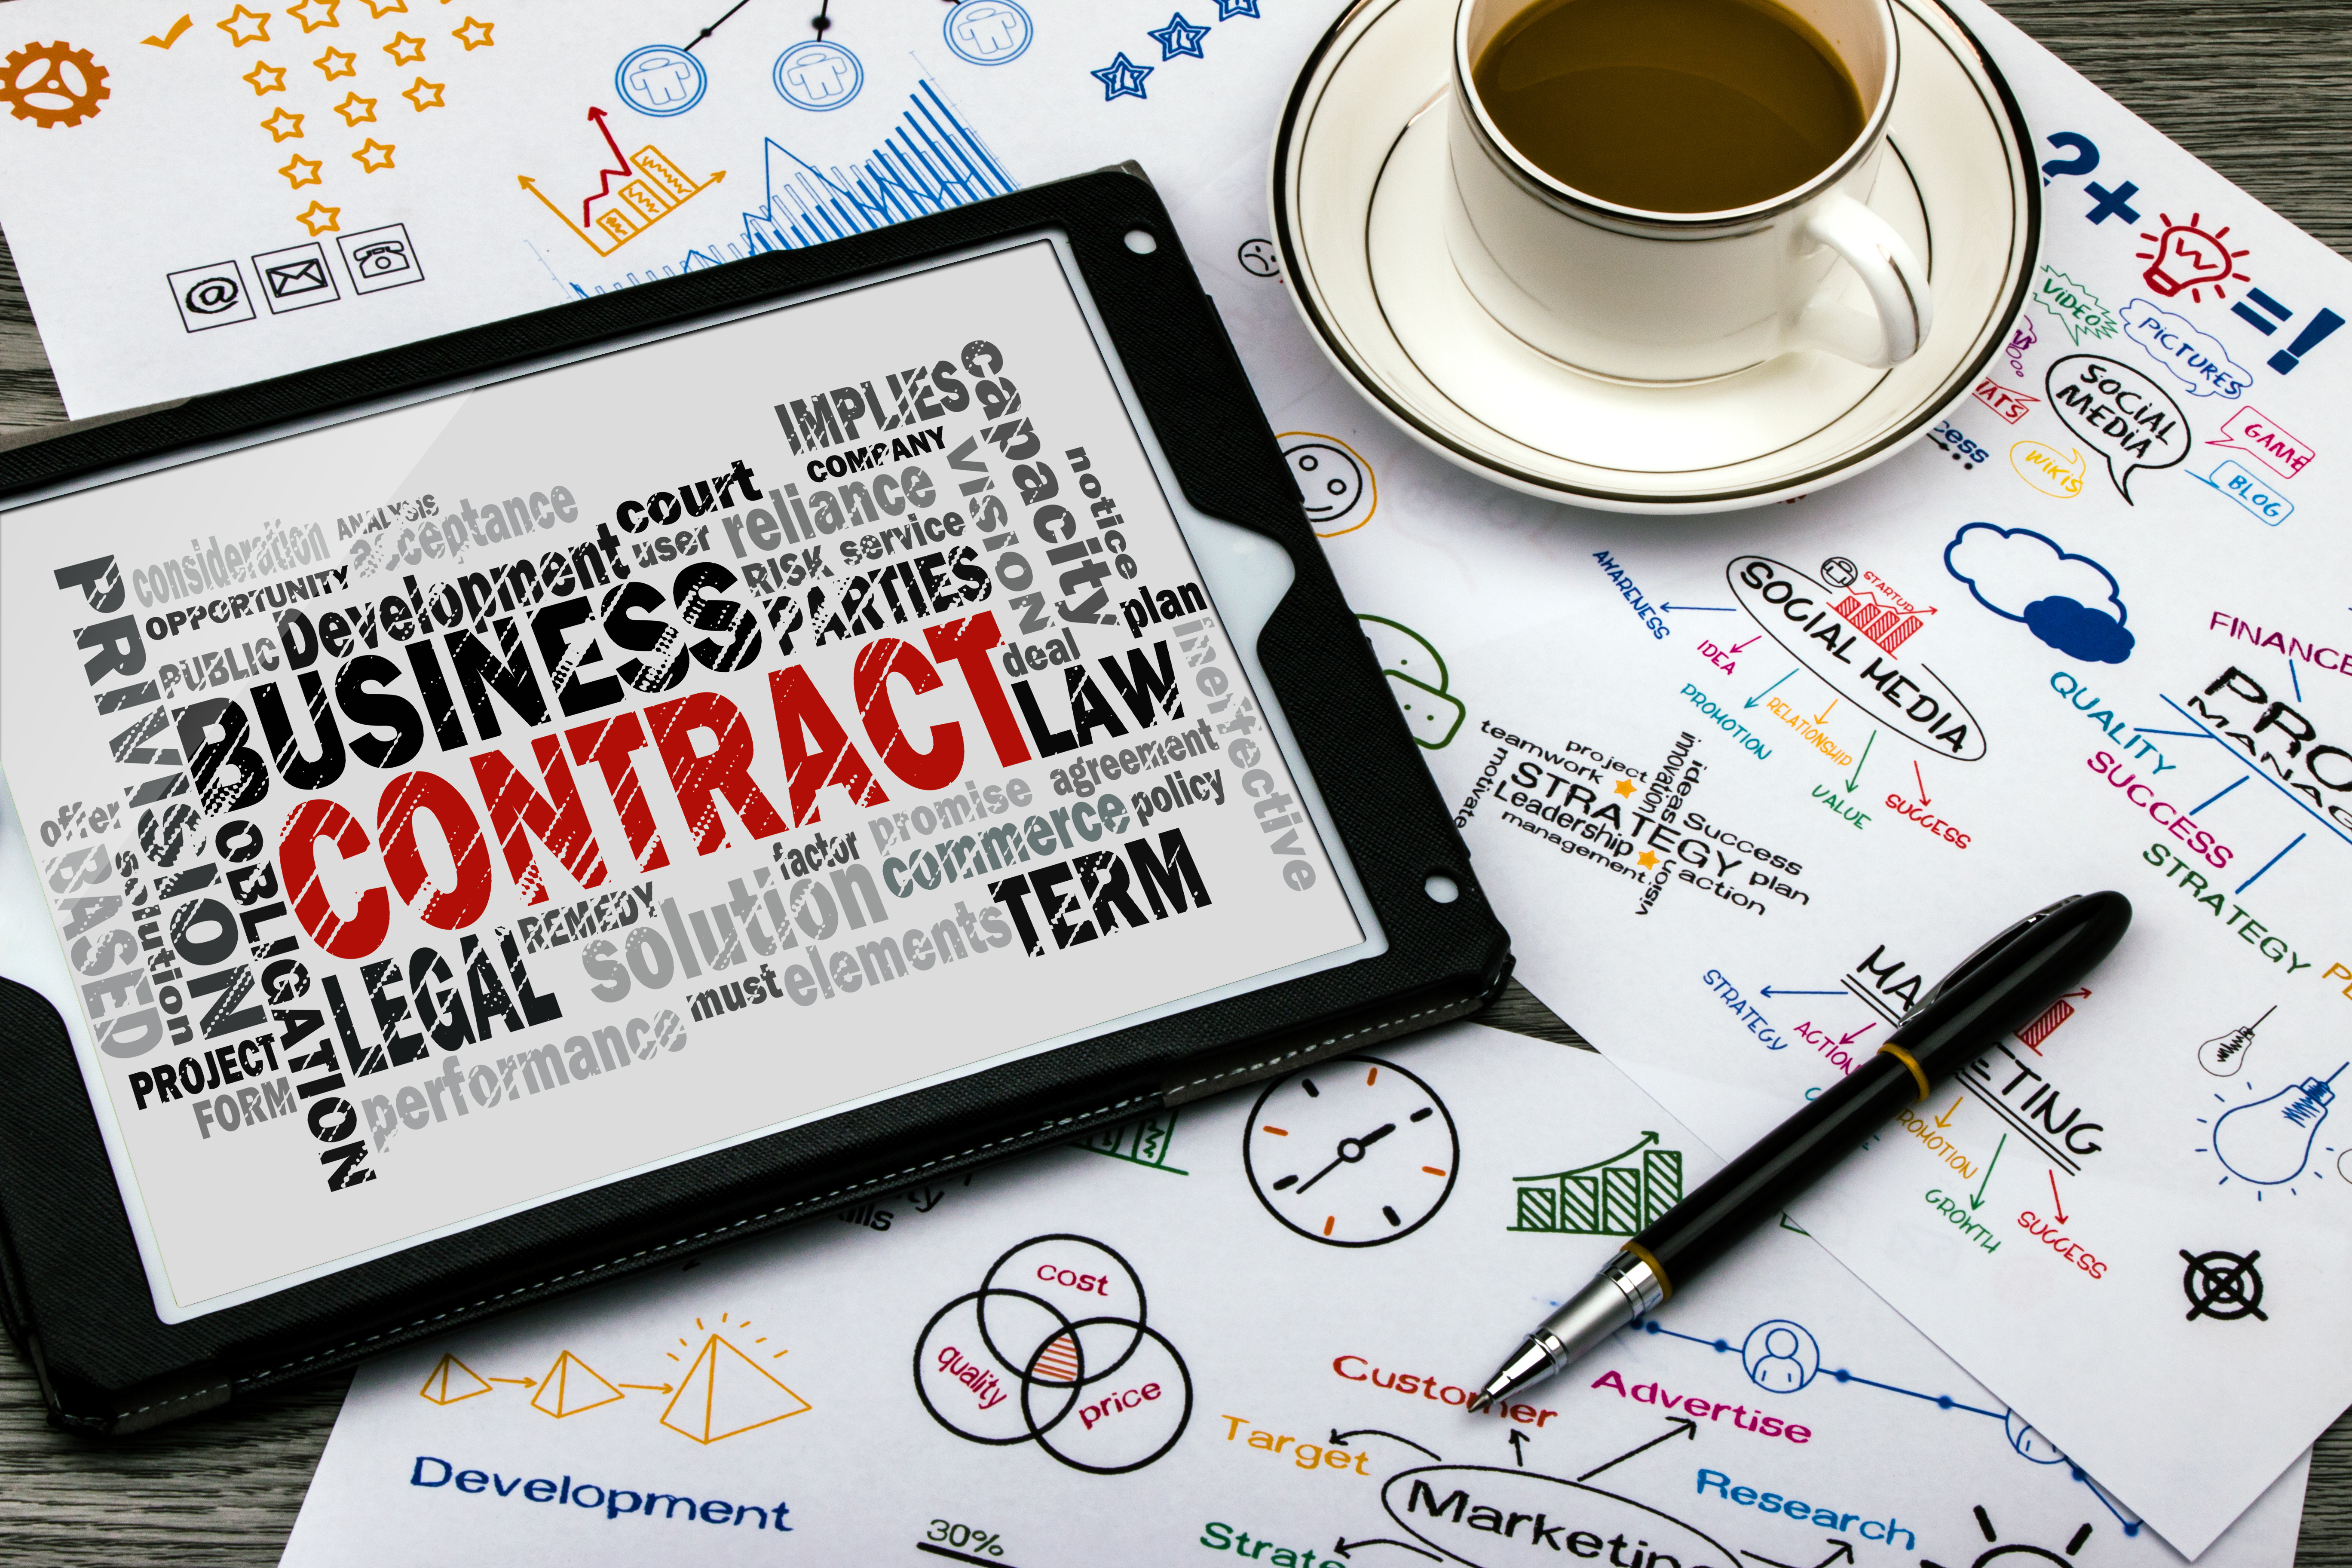 Contract Law – Offer & Acceptance